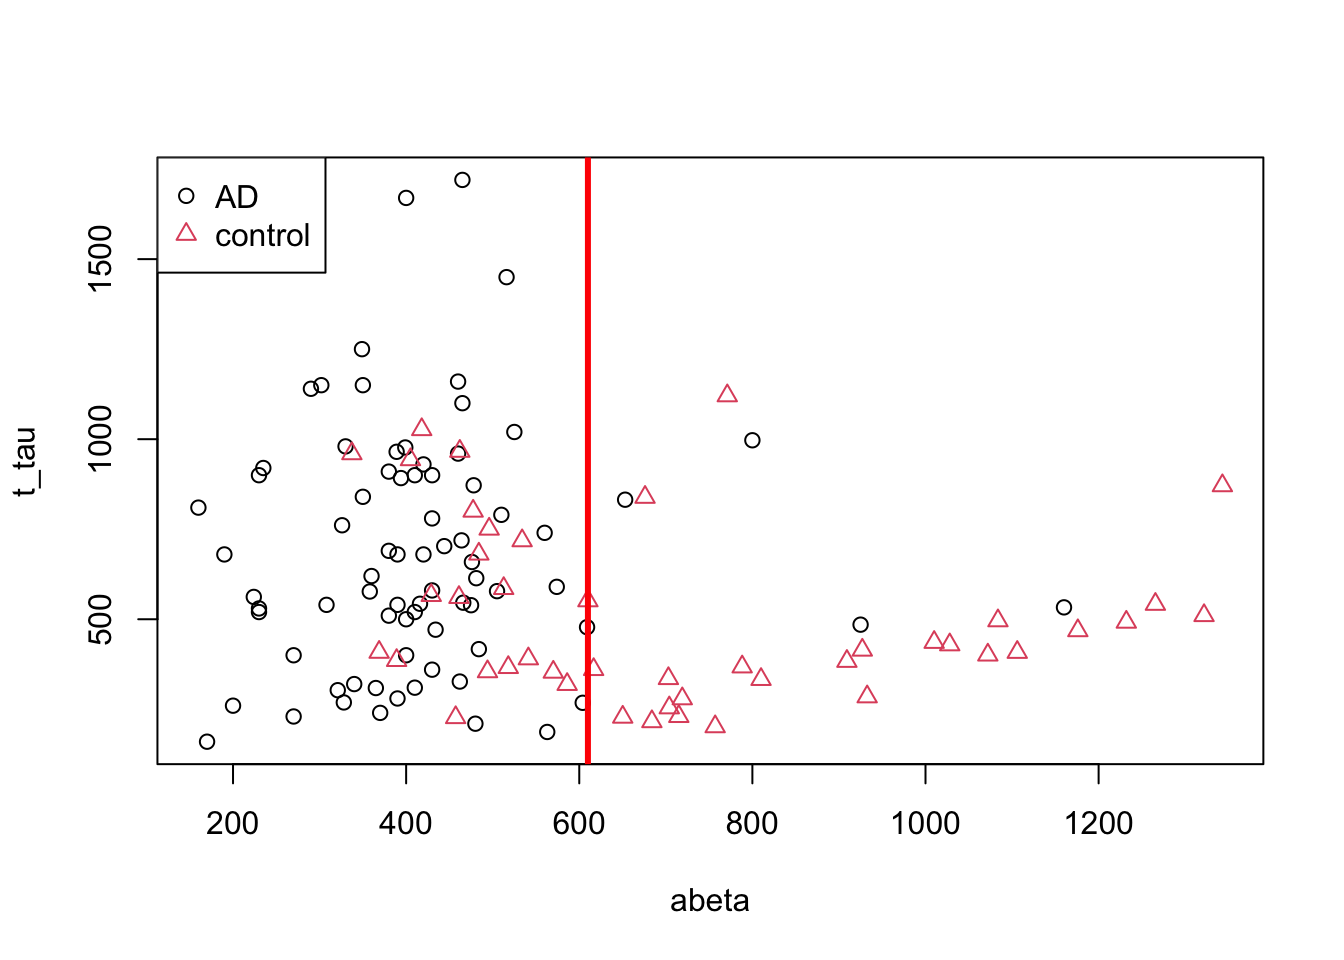 The example of two variables measured on a number of samples. Cut on abeta=610